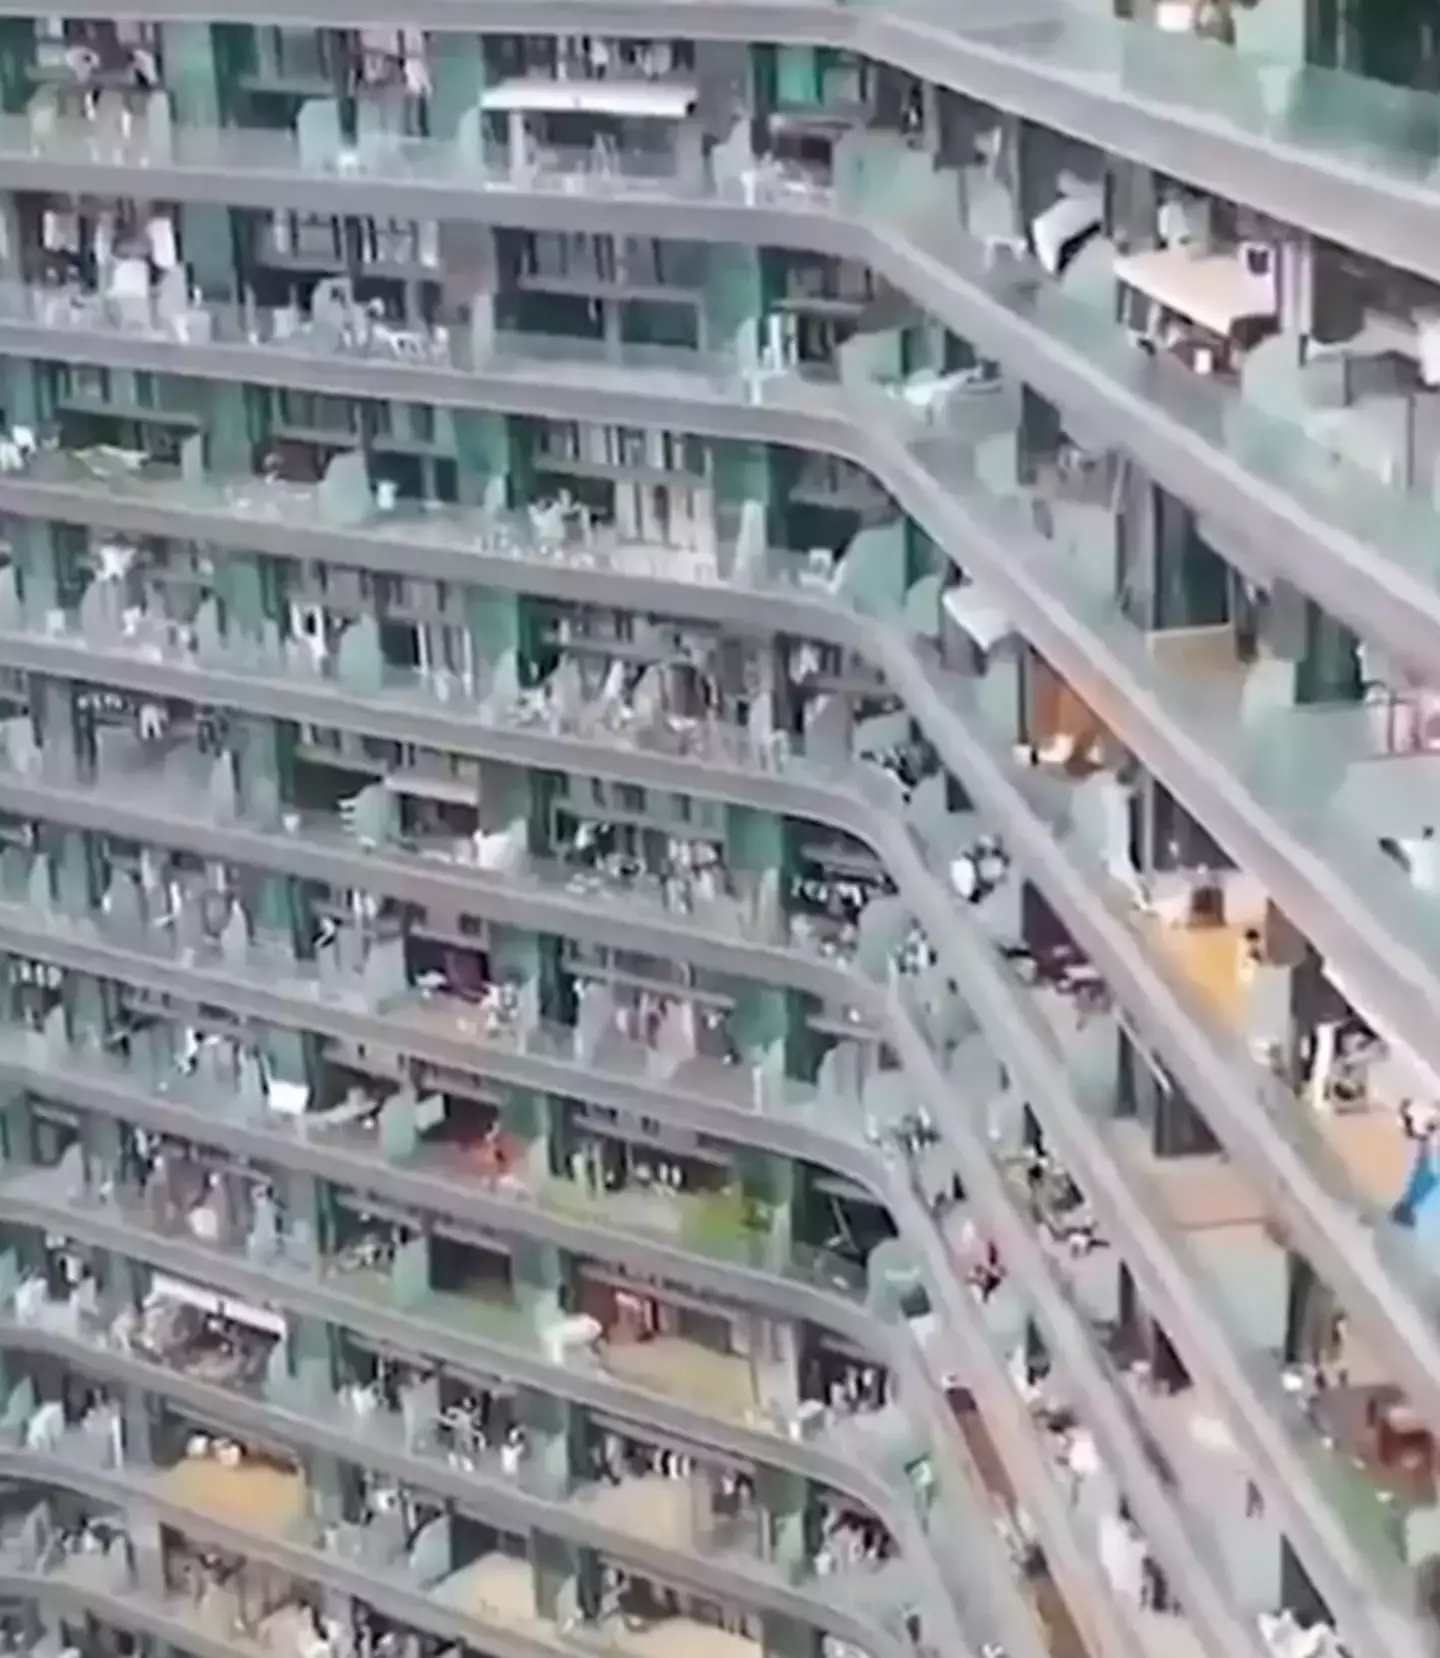 The apartment block has 20,000 residents.